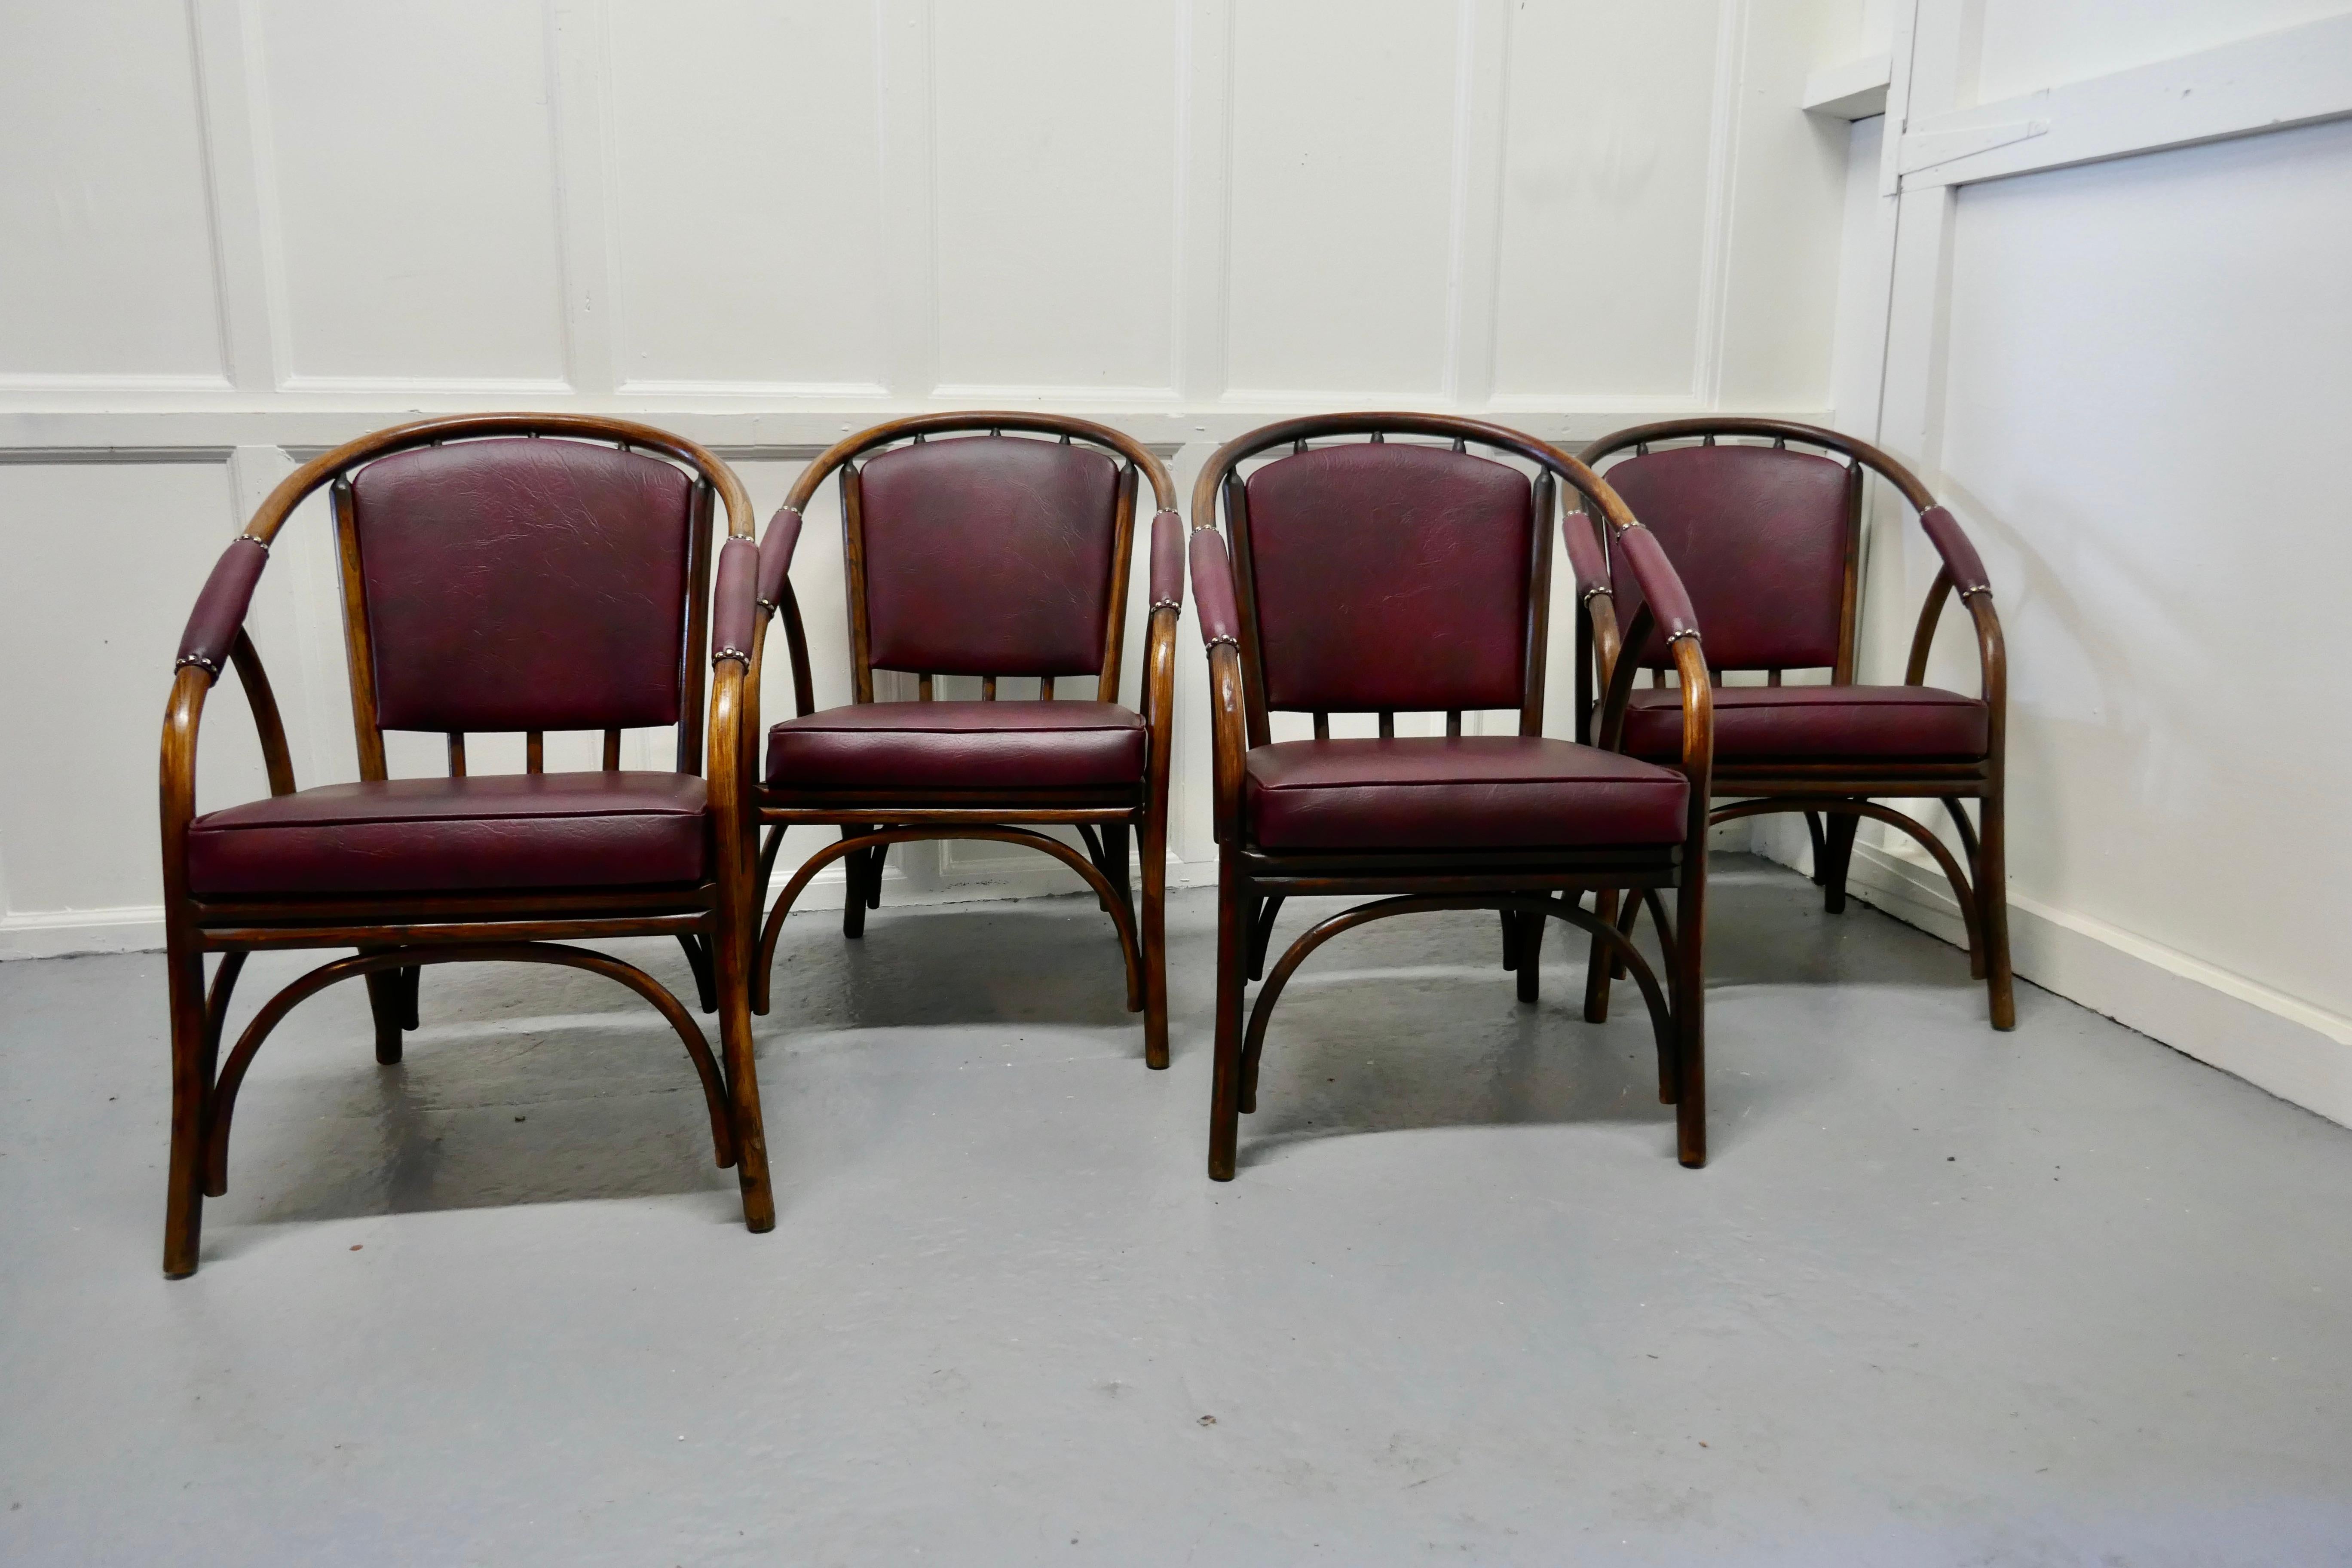 A very good set of 4 Lustycraft bentwood armchairs, new upholstery

A very good set of Lustycraft bentwood lounge chairs, the chairs are in very good condition they have new simulated leather upholstery in a burgundy red

The chairs are from the